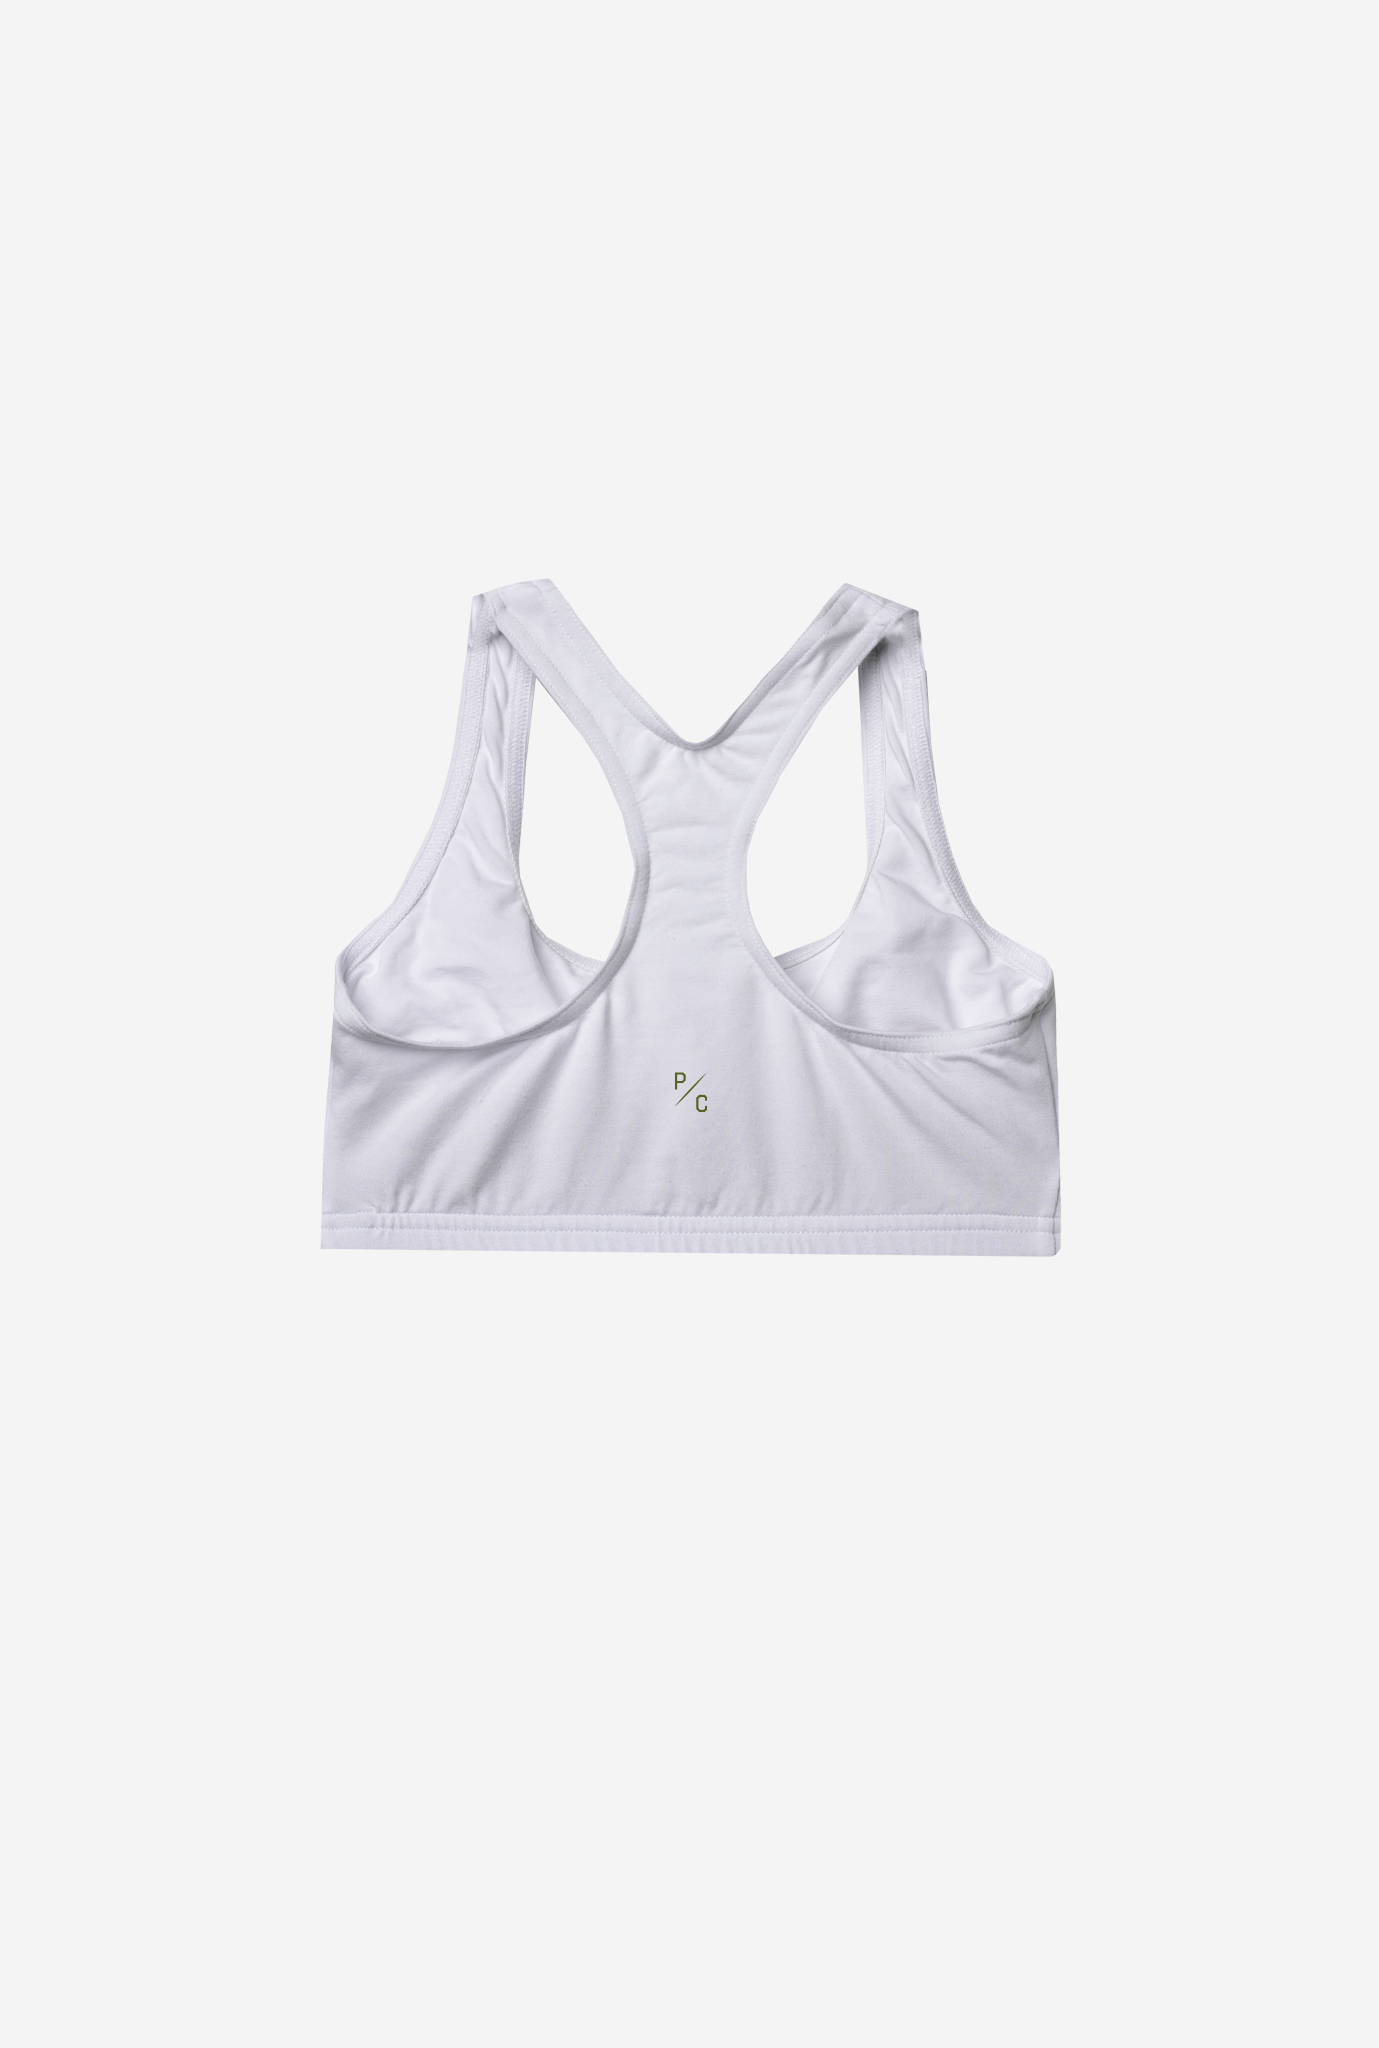 Protect Your Energy Movement™ Bra Top - White